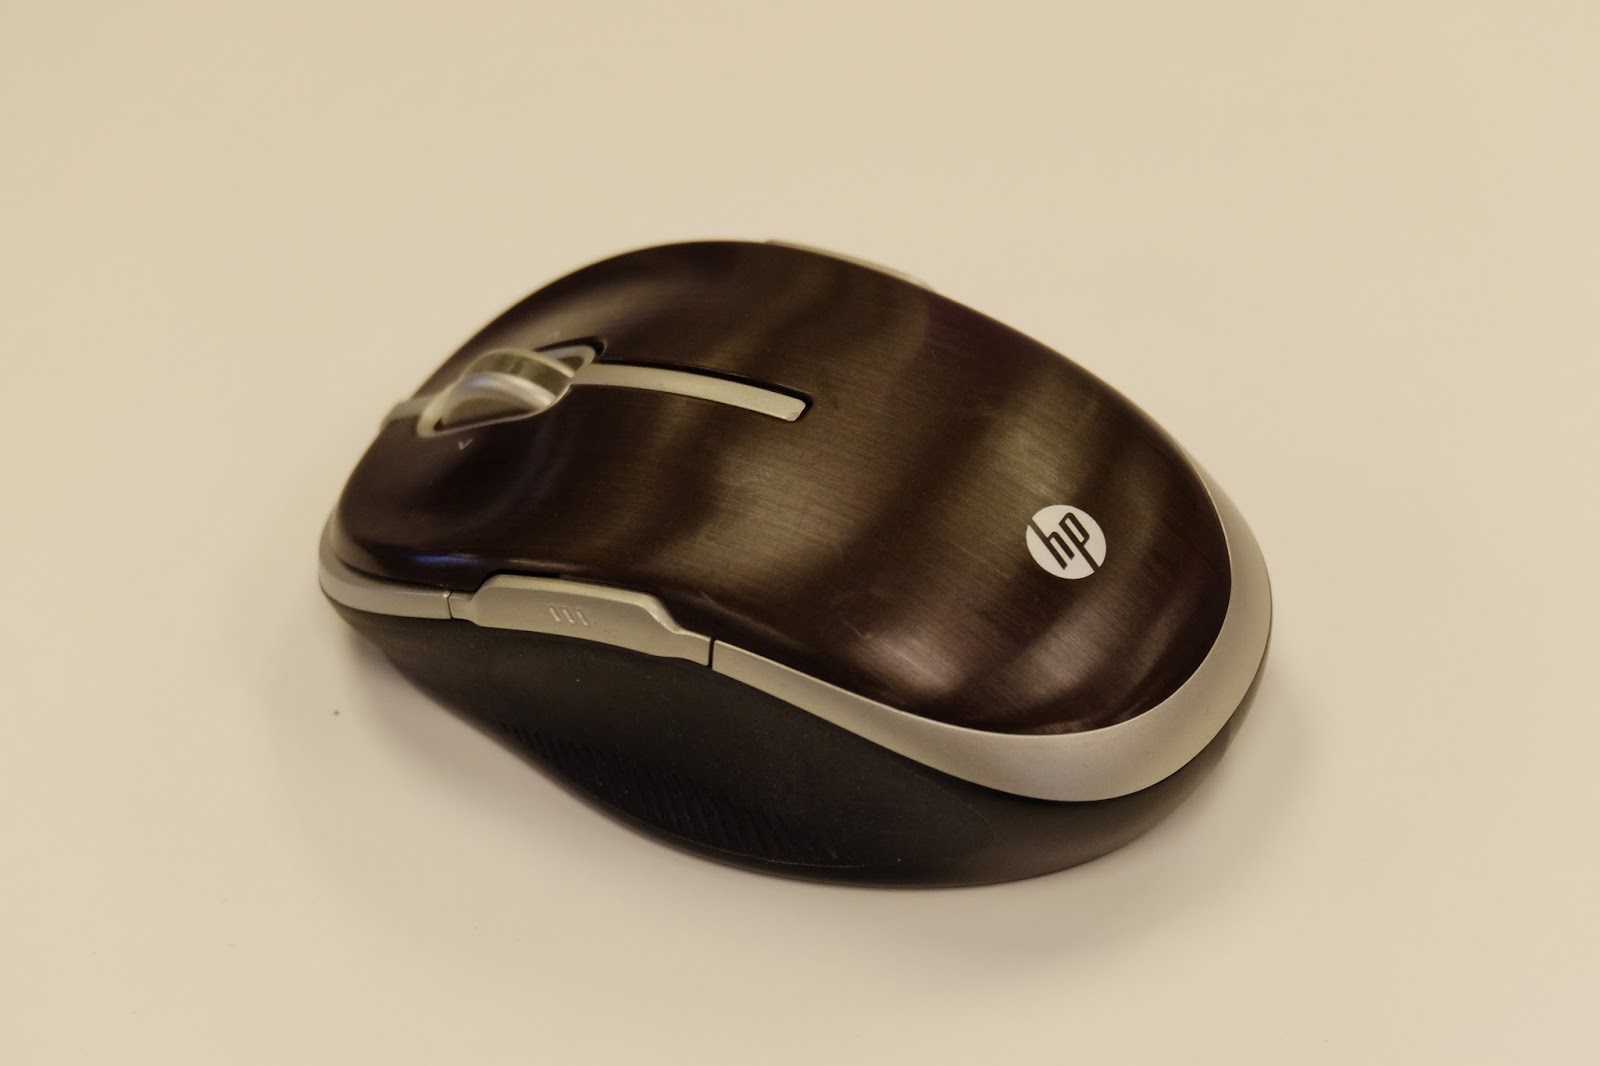 HP Wi-Fi Mobile Mouse Review